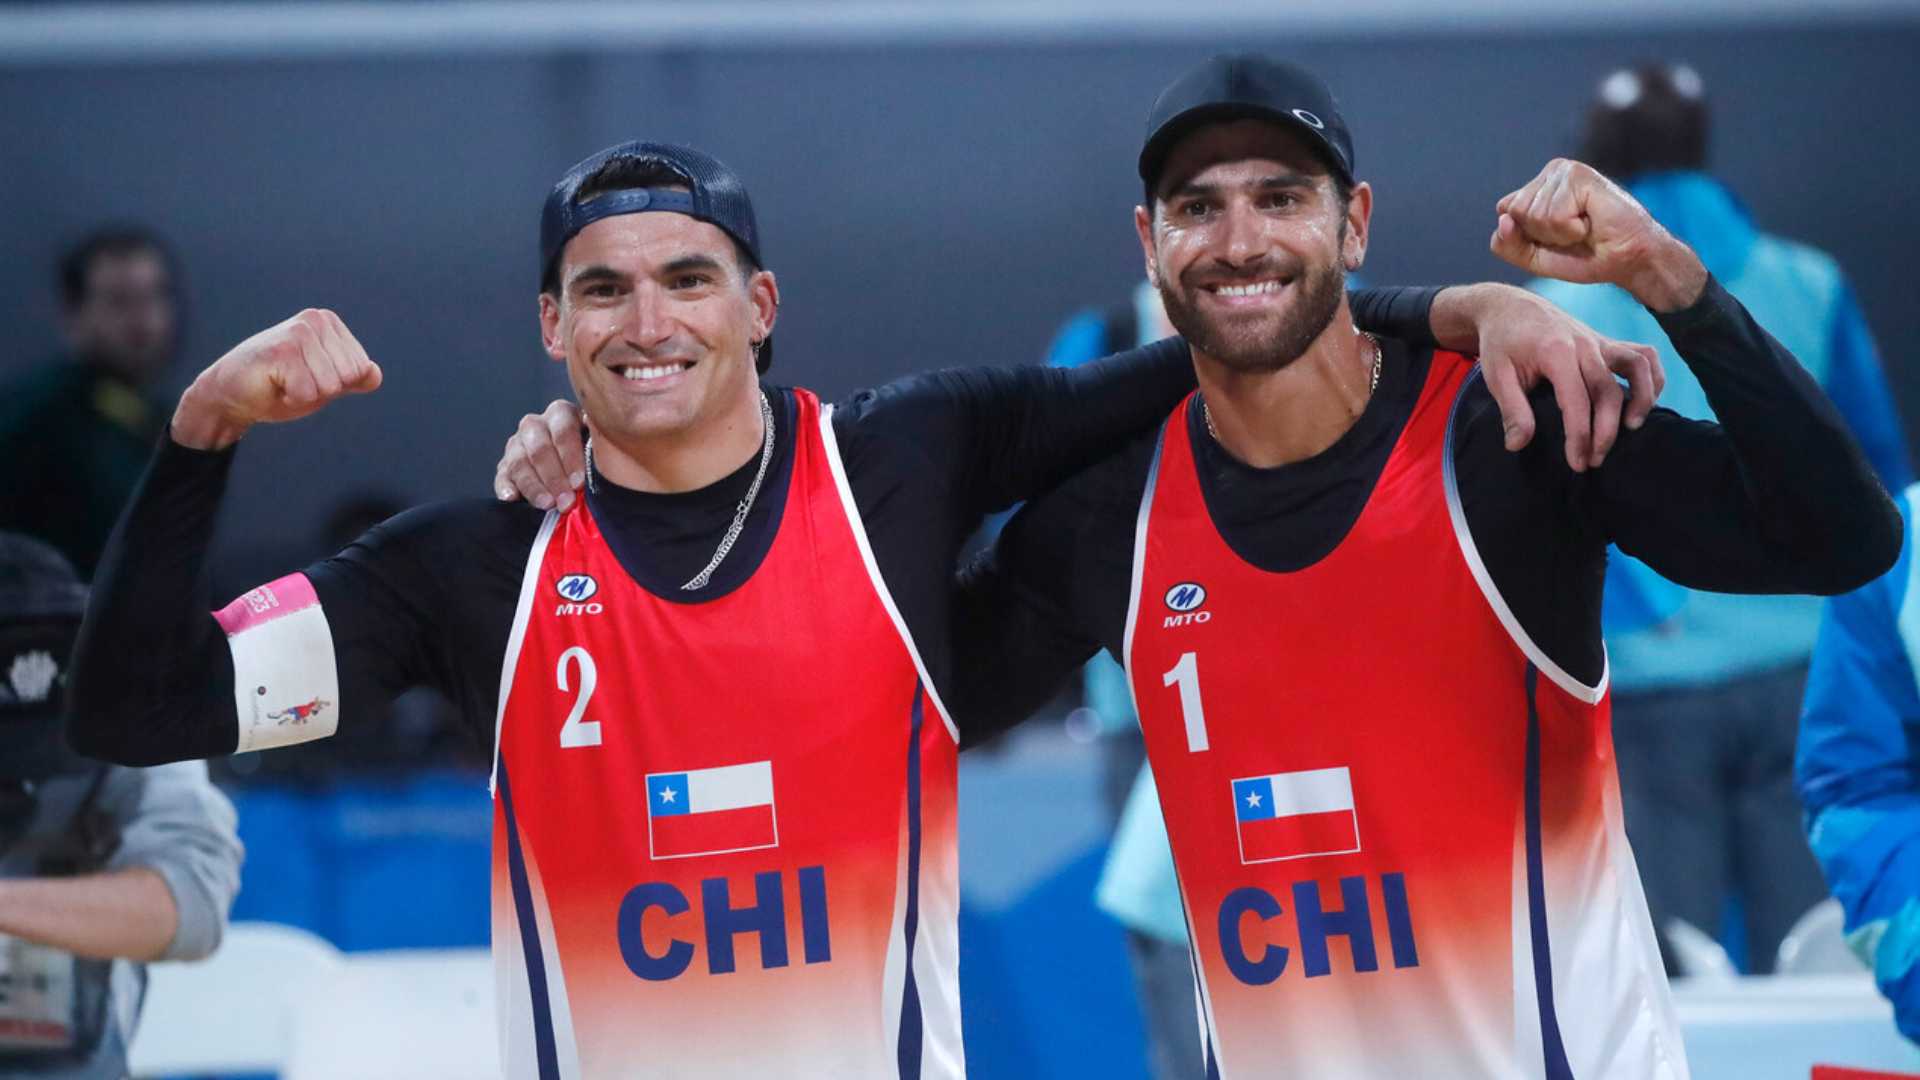 The Grimalt cousins defend their Pan American gold with a solid victory